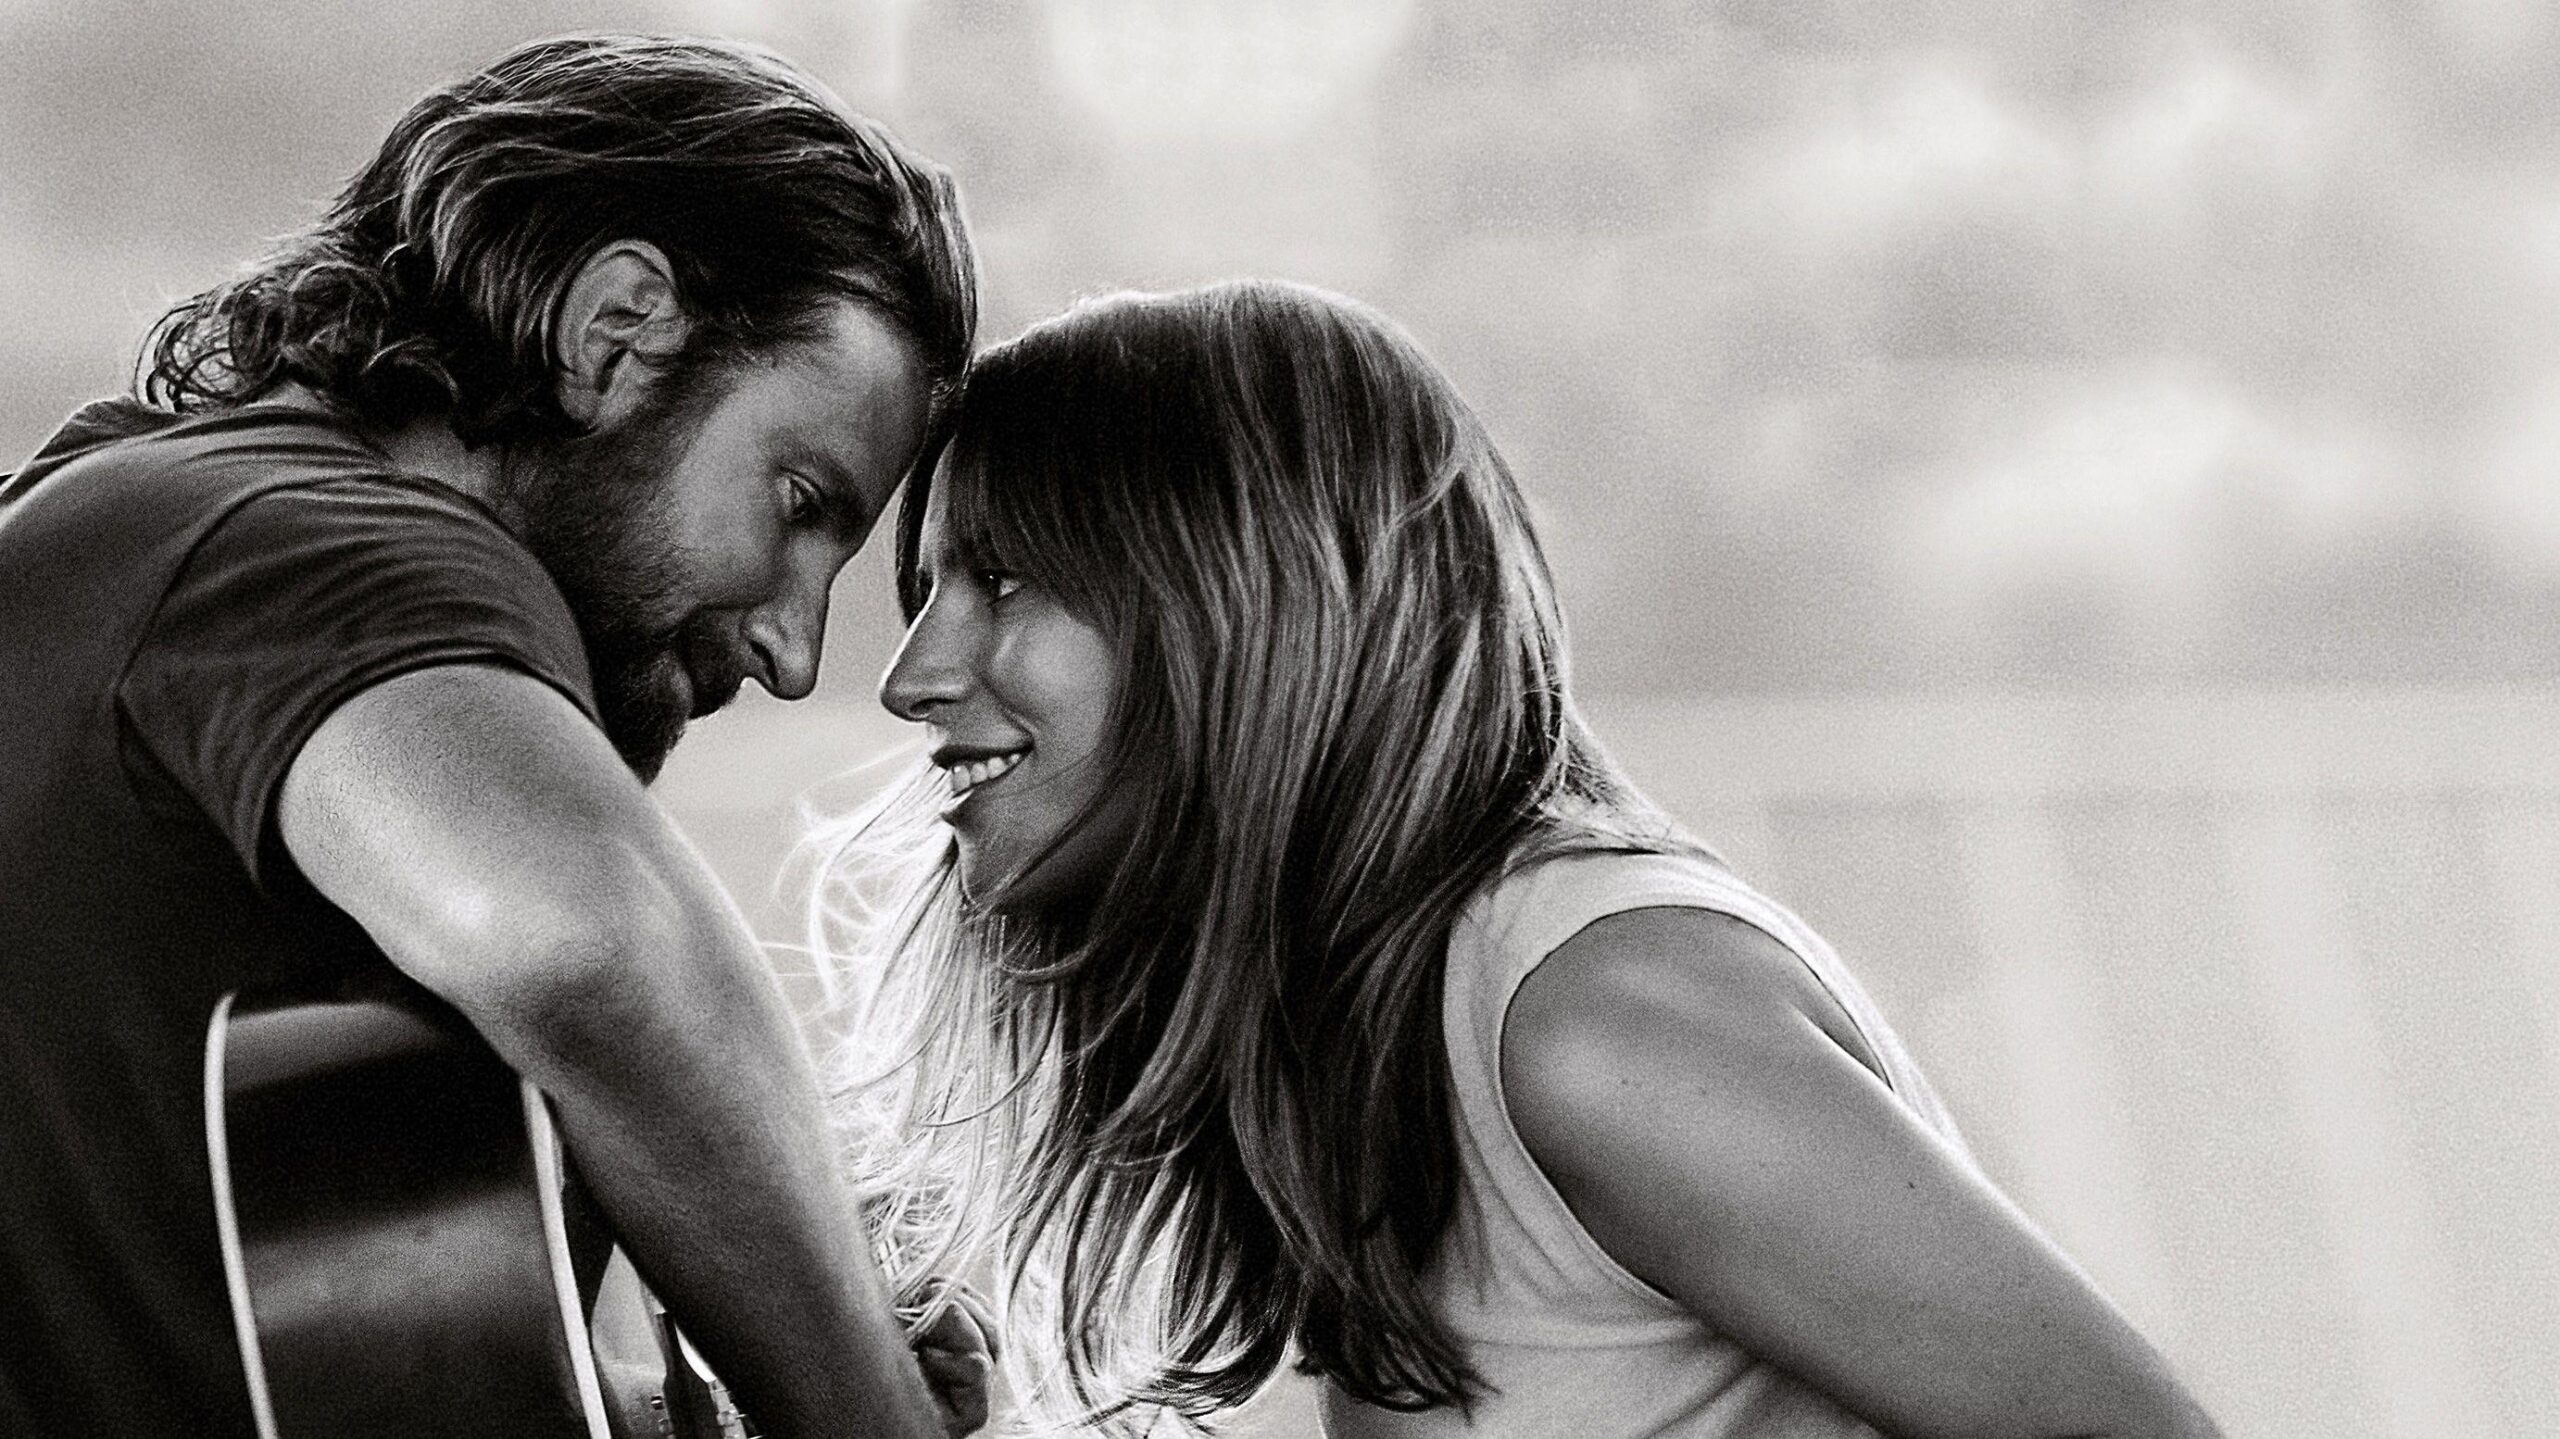 A Star Is Born Movie Poster, 2K Movies, k Wallpapers, Wallpaper